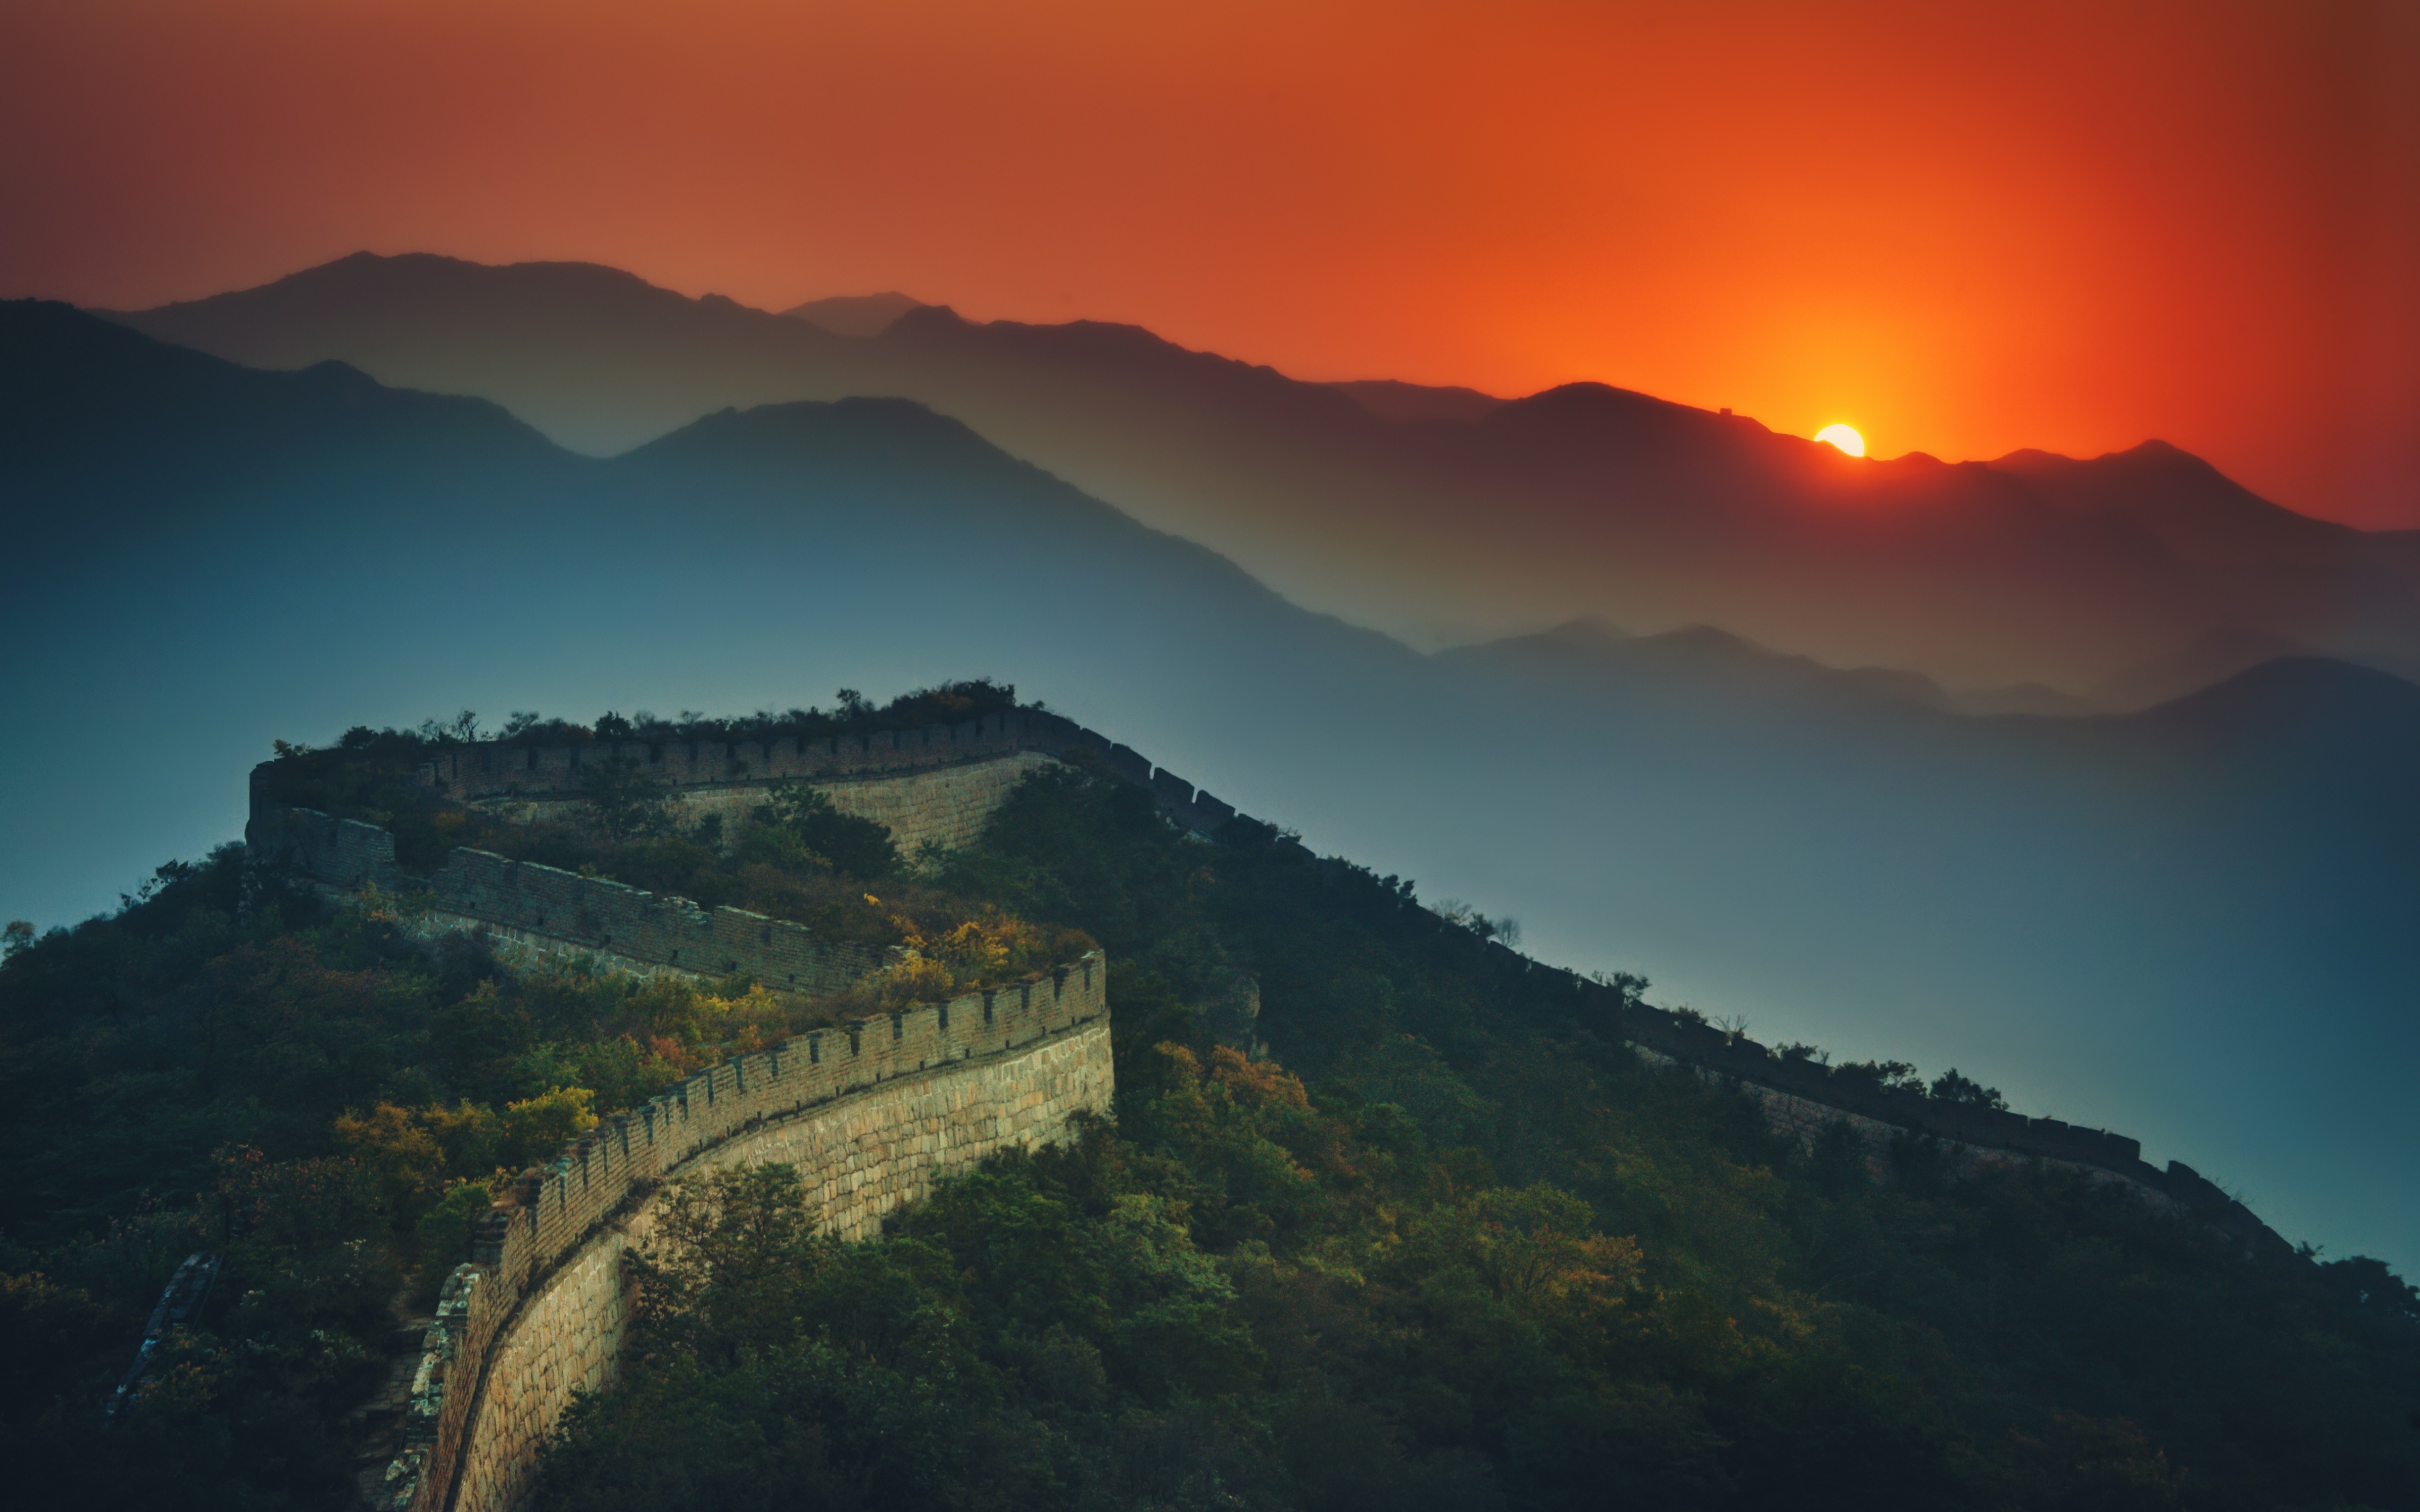 sunset, man made, great wall of china, china, monuments wallpaper for mobile